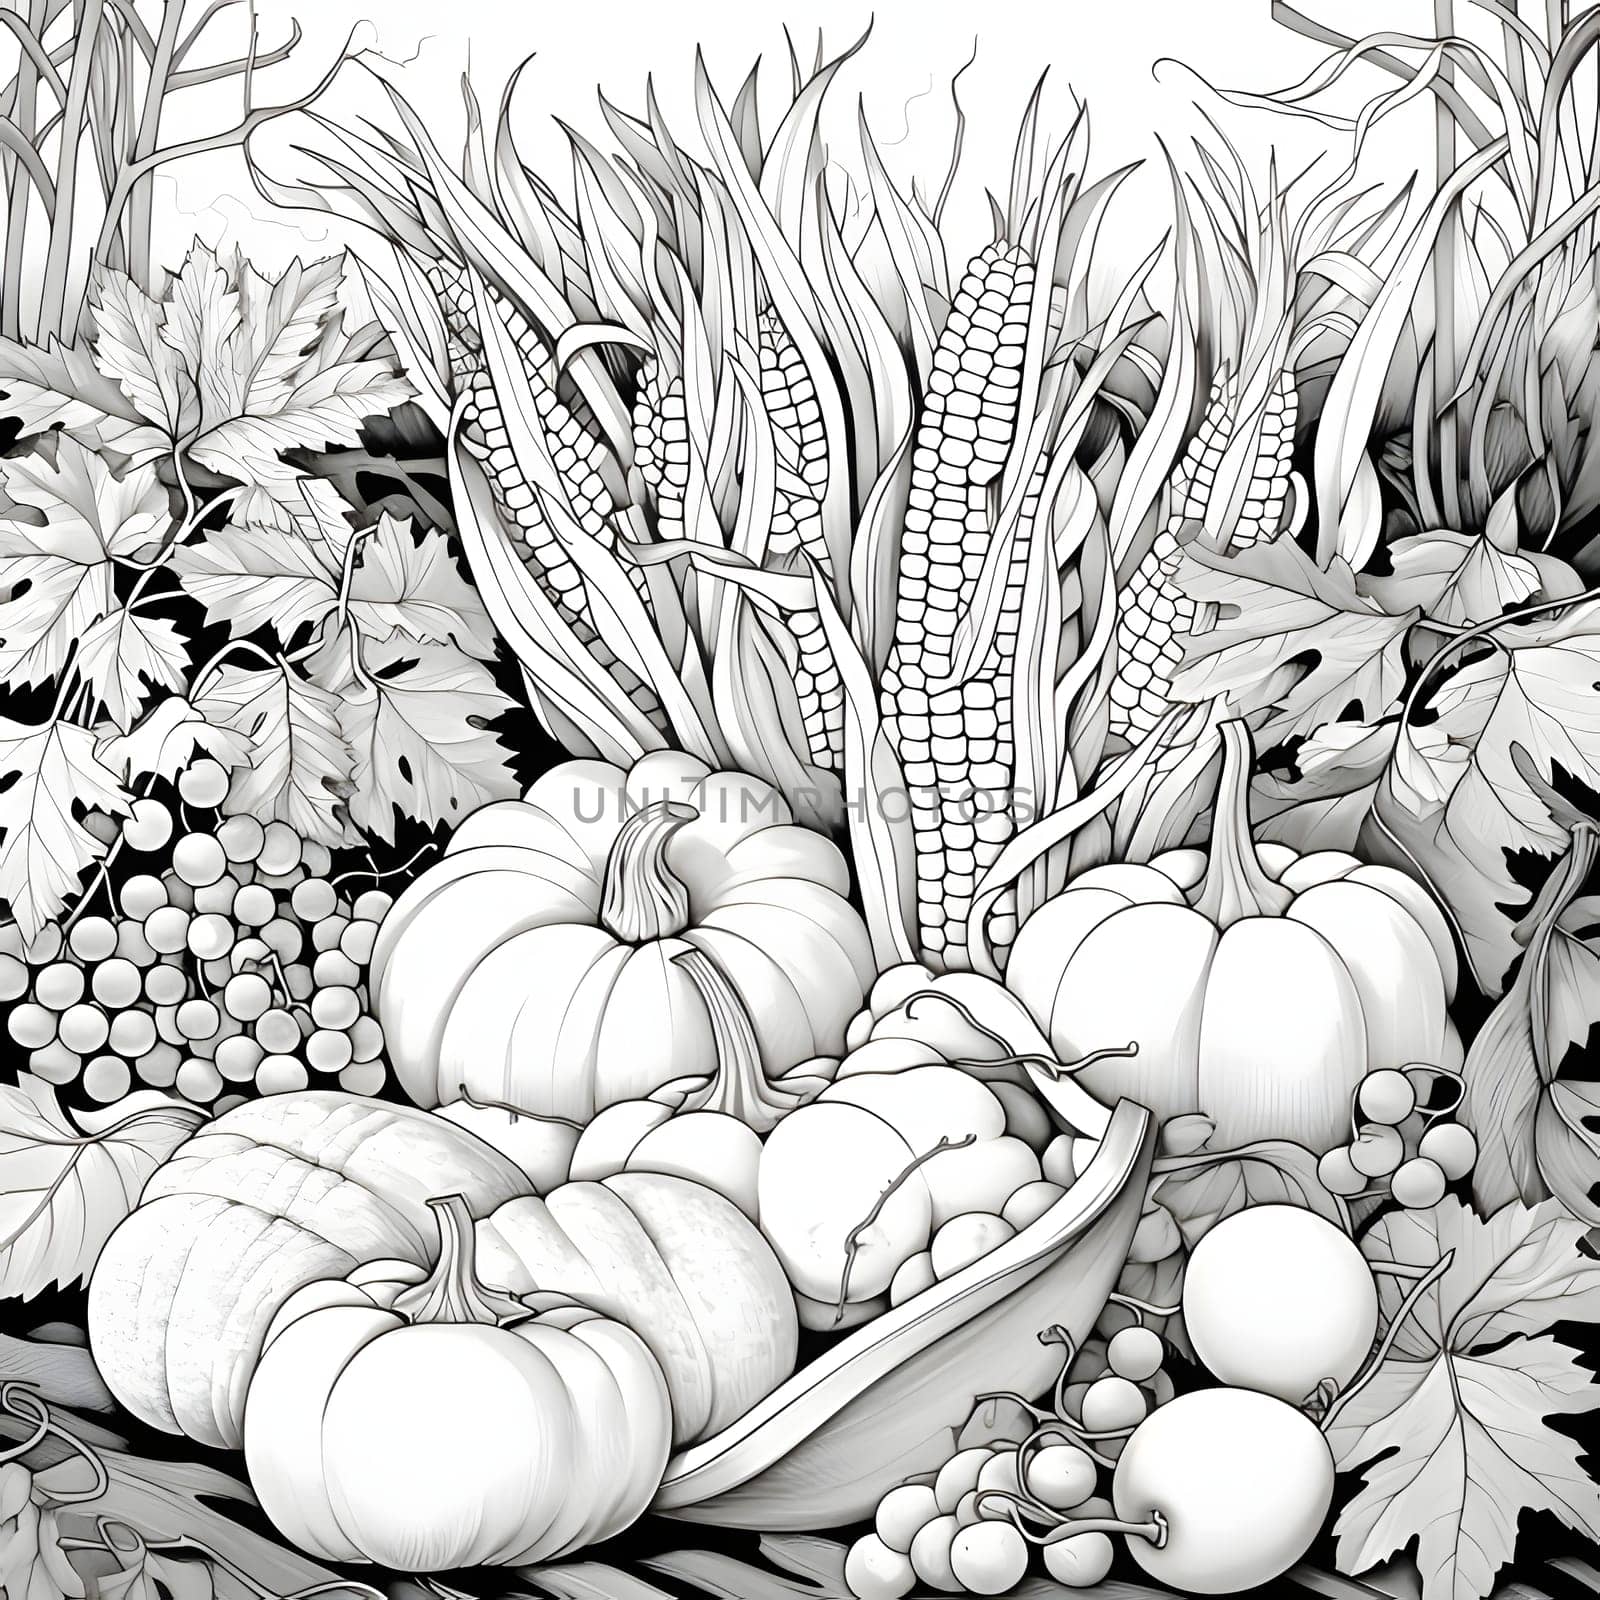 Black and White coloring book, harvest from the field corn grapes, pumpkin leaves. Pumpkin as a dish of thanksgiving for the harvest, picture on a white isolated background. by ThemesS